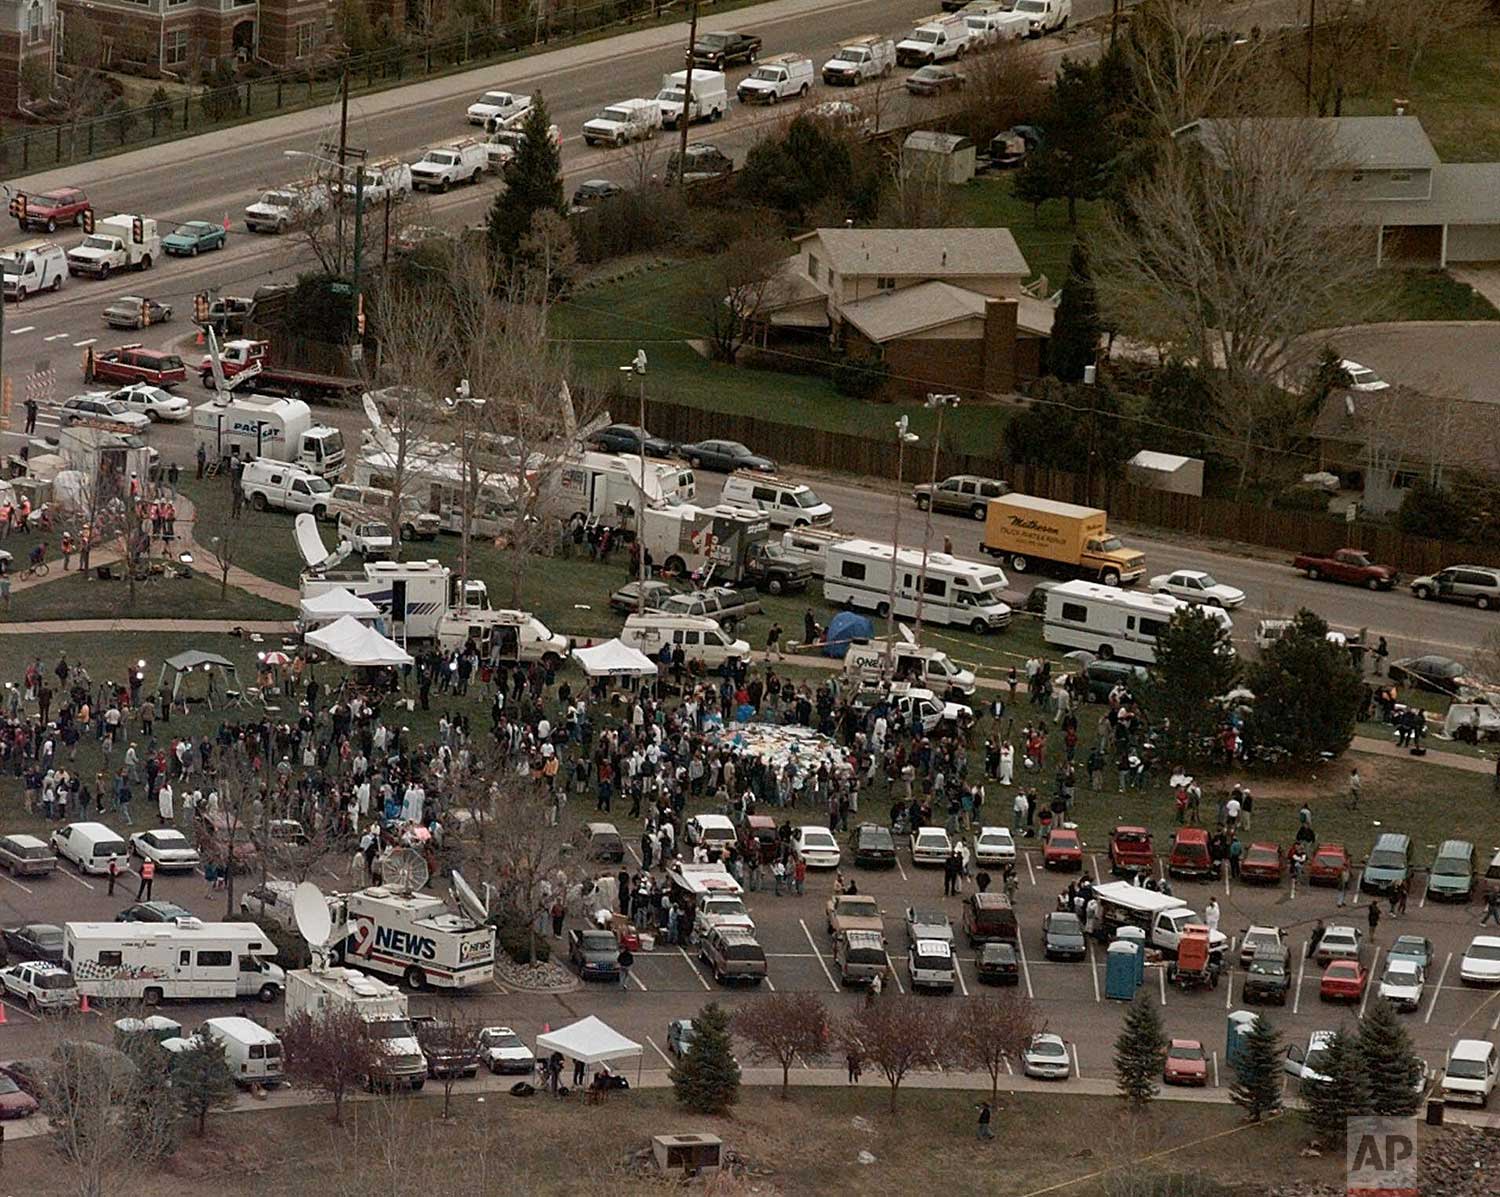  This aerial shows the news media compound near Columbine High School in Littleton, Colo., Wednesday, April 21, 1999. Media from around the world poured into the area after 15 people were killed during a shooting spree inside the school. (AP Photo/Ed